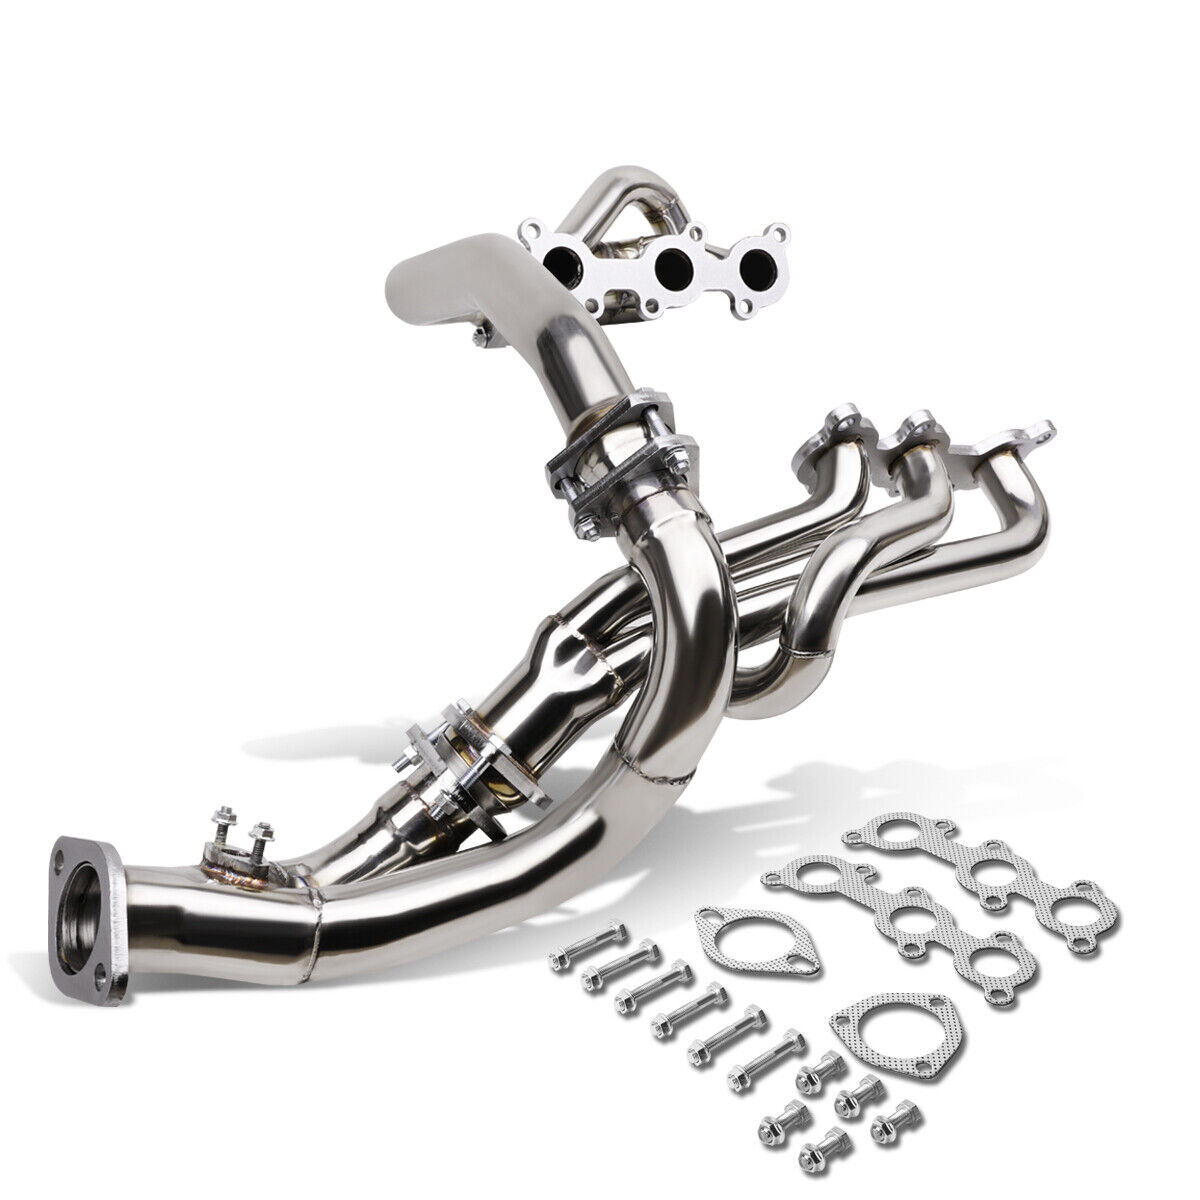 Fit 95-04 Tacoma/-01 T100 3.4 V6 Stainless Racing Header Exhaust Manifold+Y-Pipe